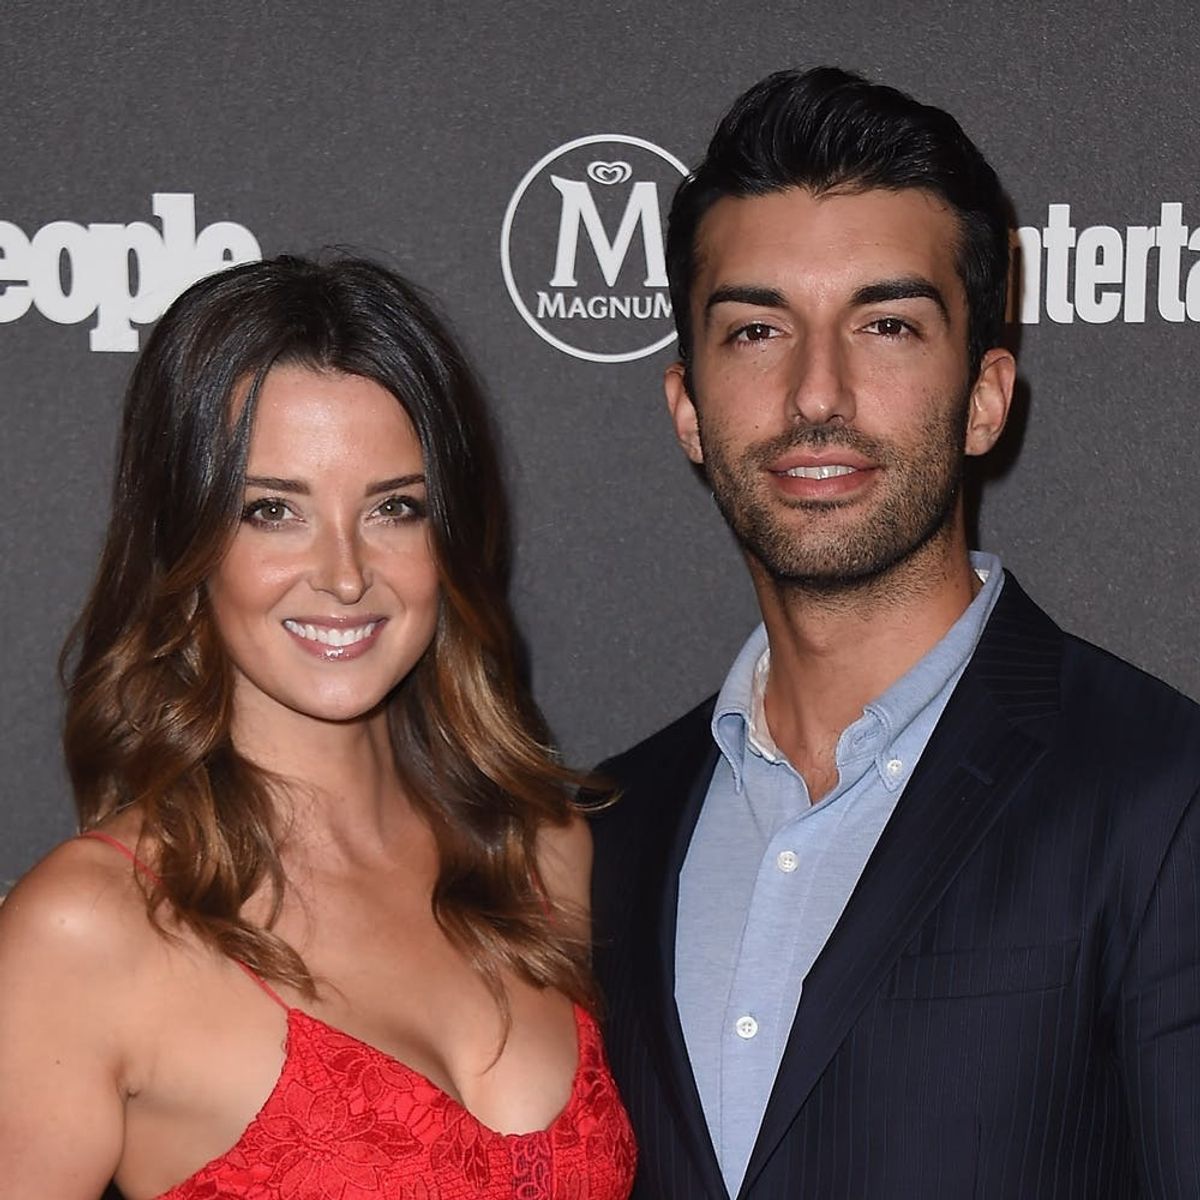 You’ll Love the Classic Name “Jane the Virgin” Star Justin Baldoni and Wife Emily Chose for Their Newborn Son